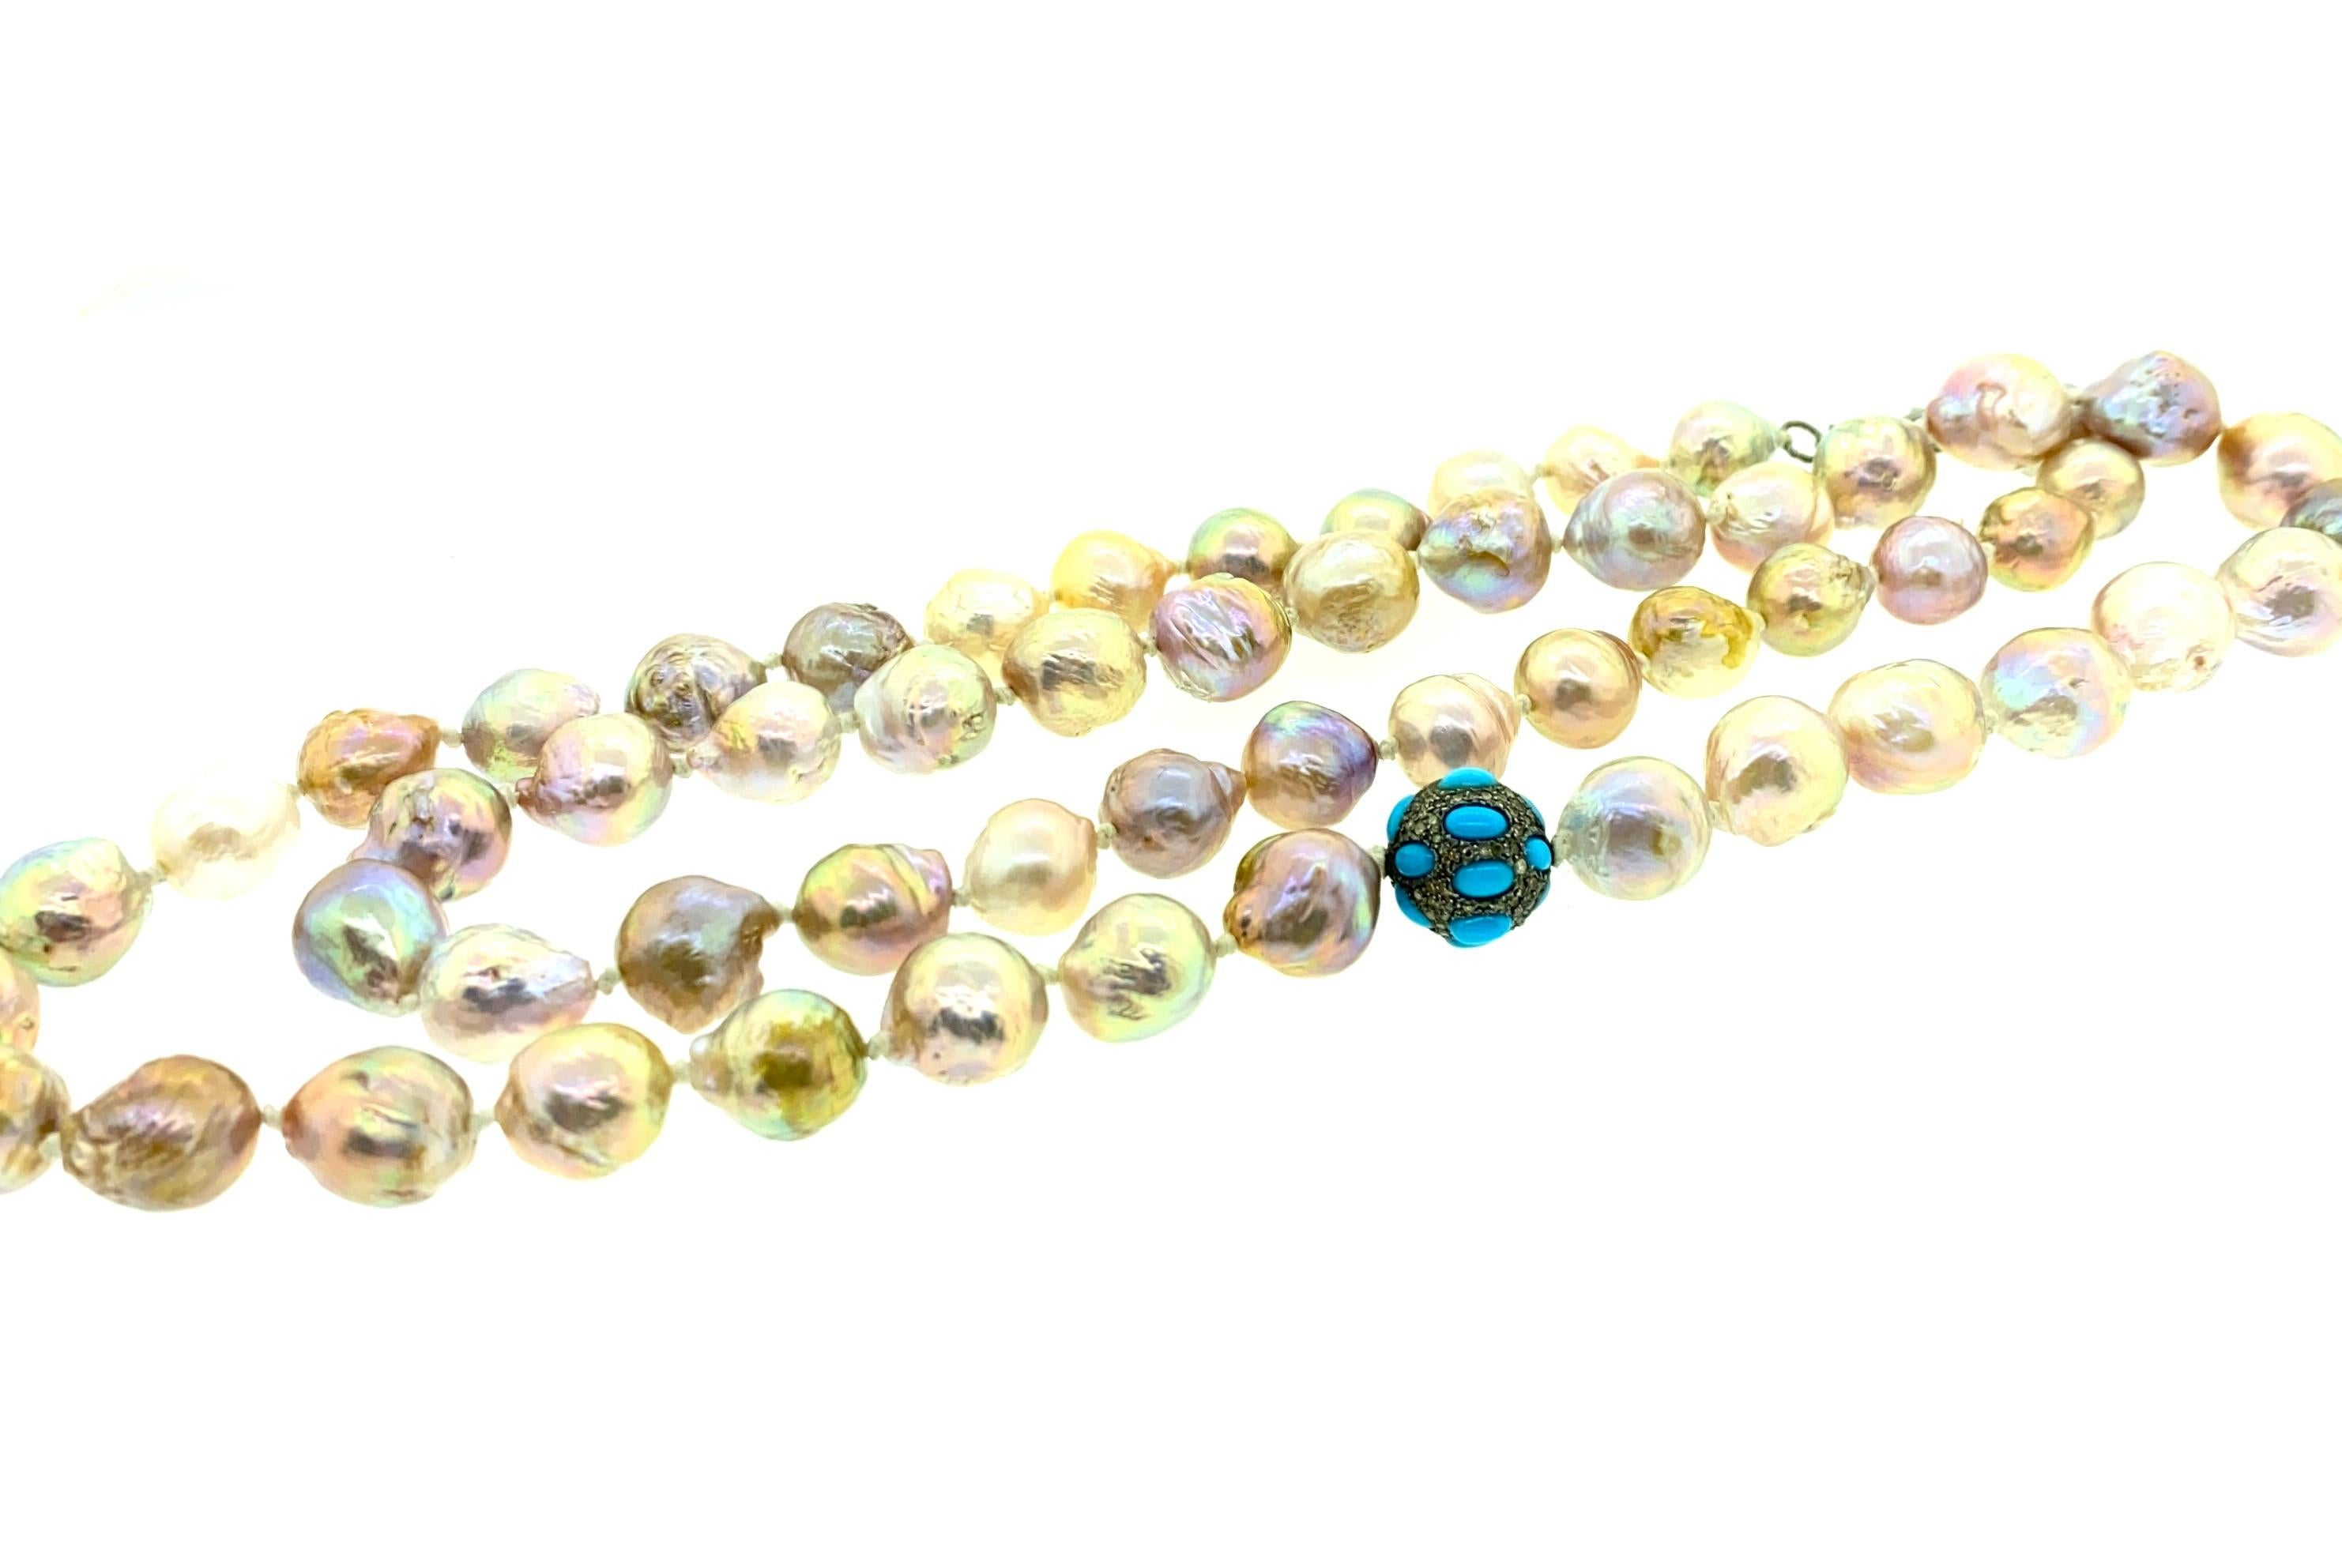 36 Inch Long 730 ct Pearl, 2.72 ct Turquoise , 0.86 ct Champagne Diamond Thread Knotted Necklace with Silver Lobster Clasp. Each Freashwater Pearl has been hand knotted using white thread and also has one Champagne diamond and turquoise bead falling